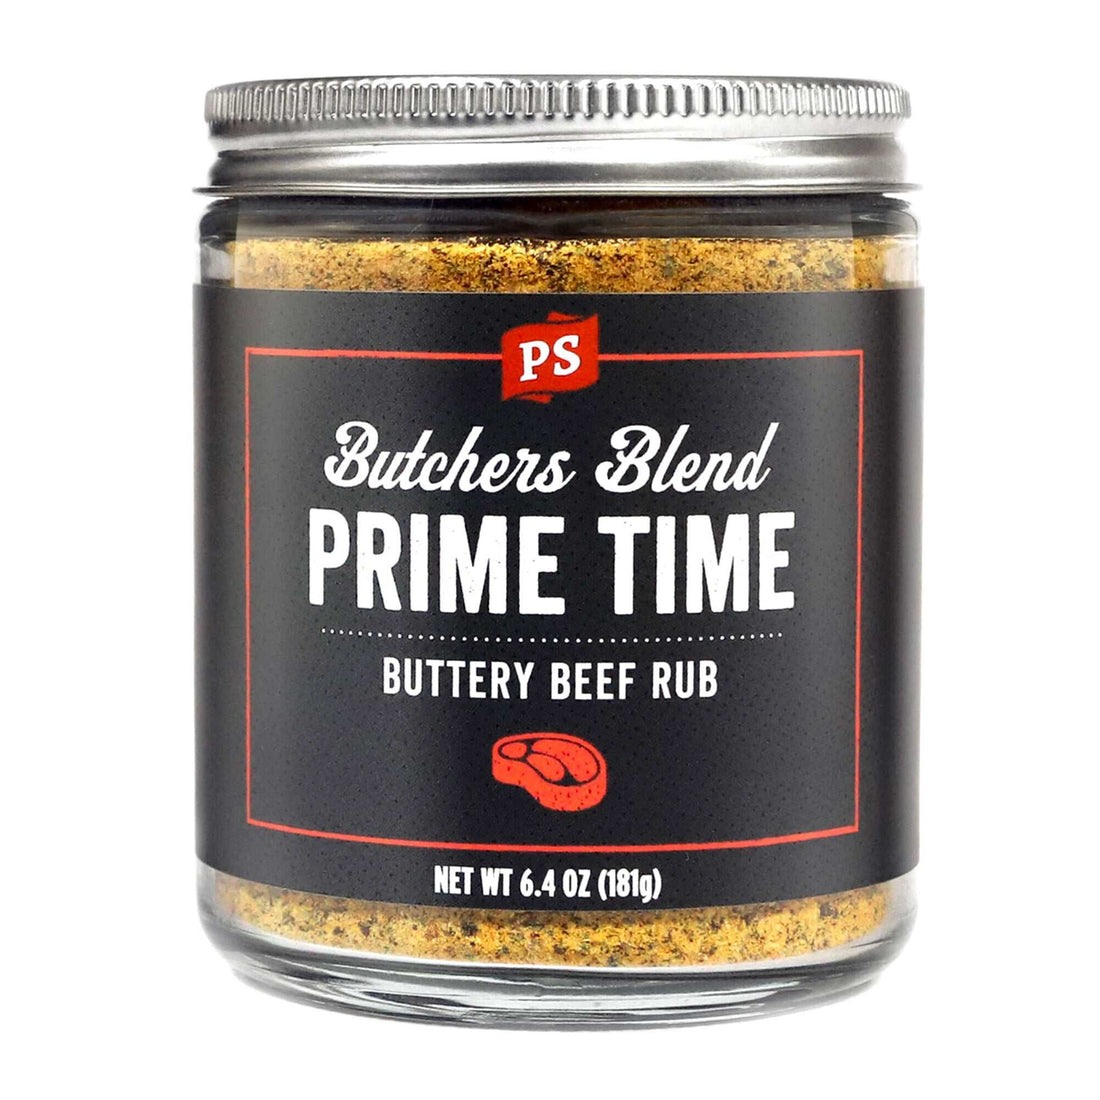 Prime Time - Buttery Beef Rub